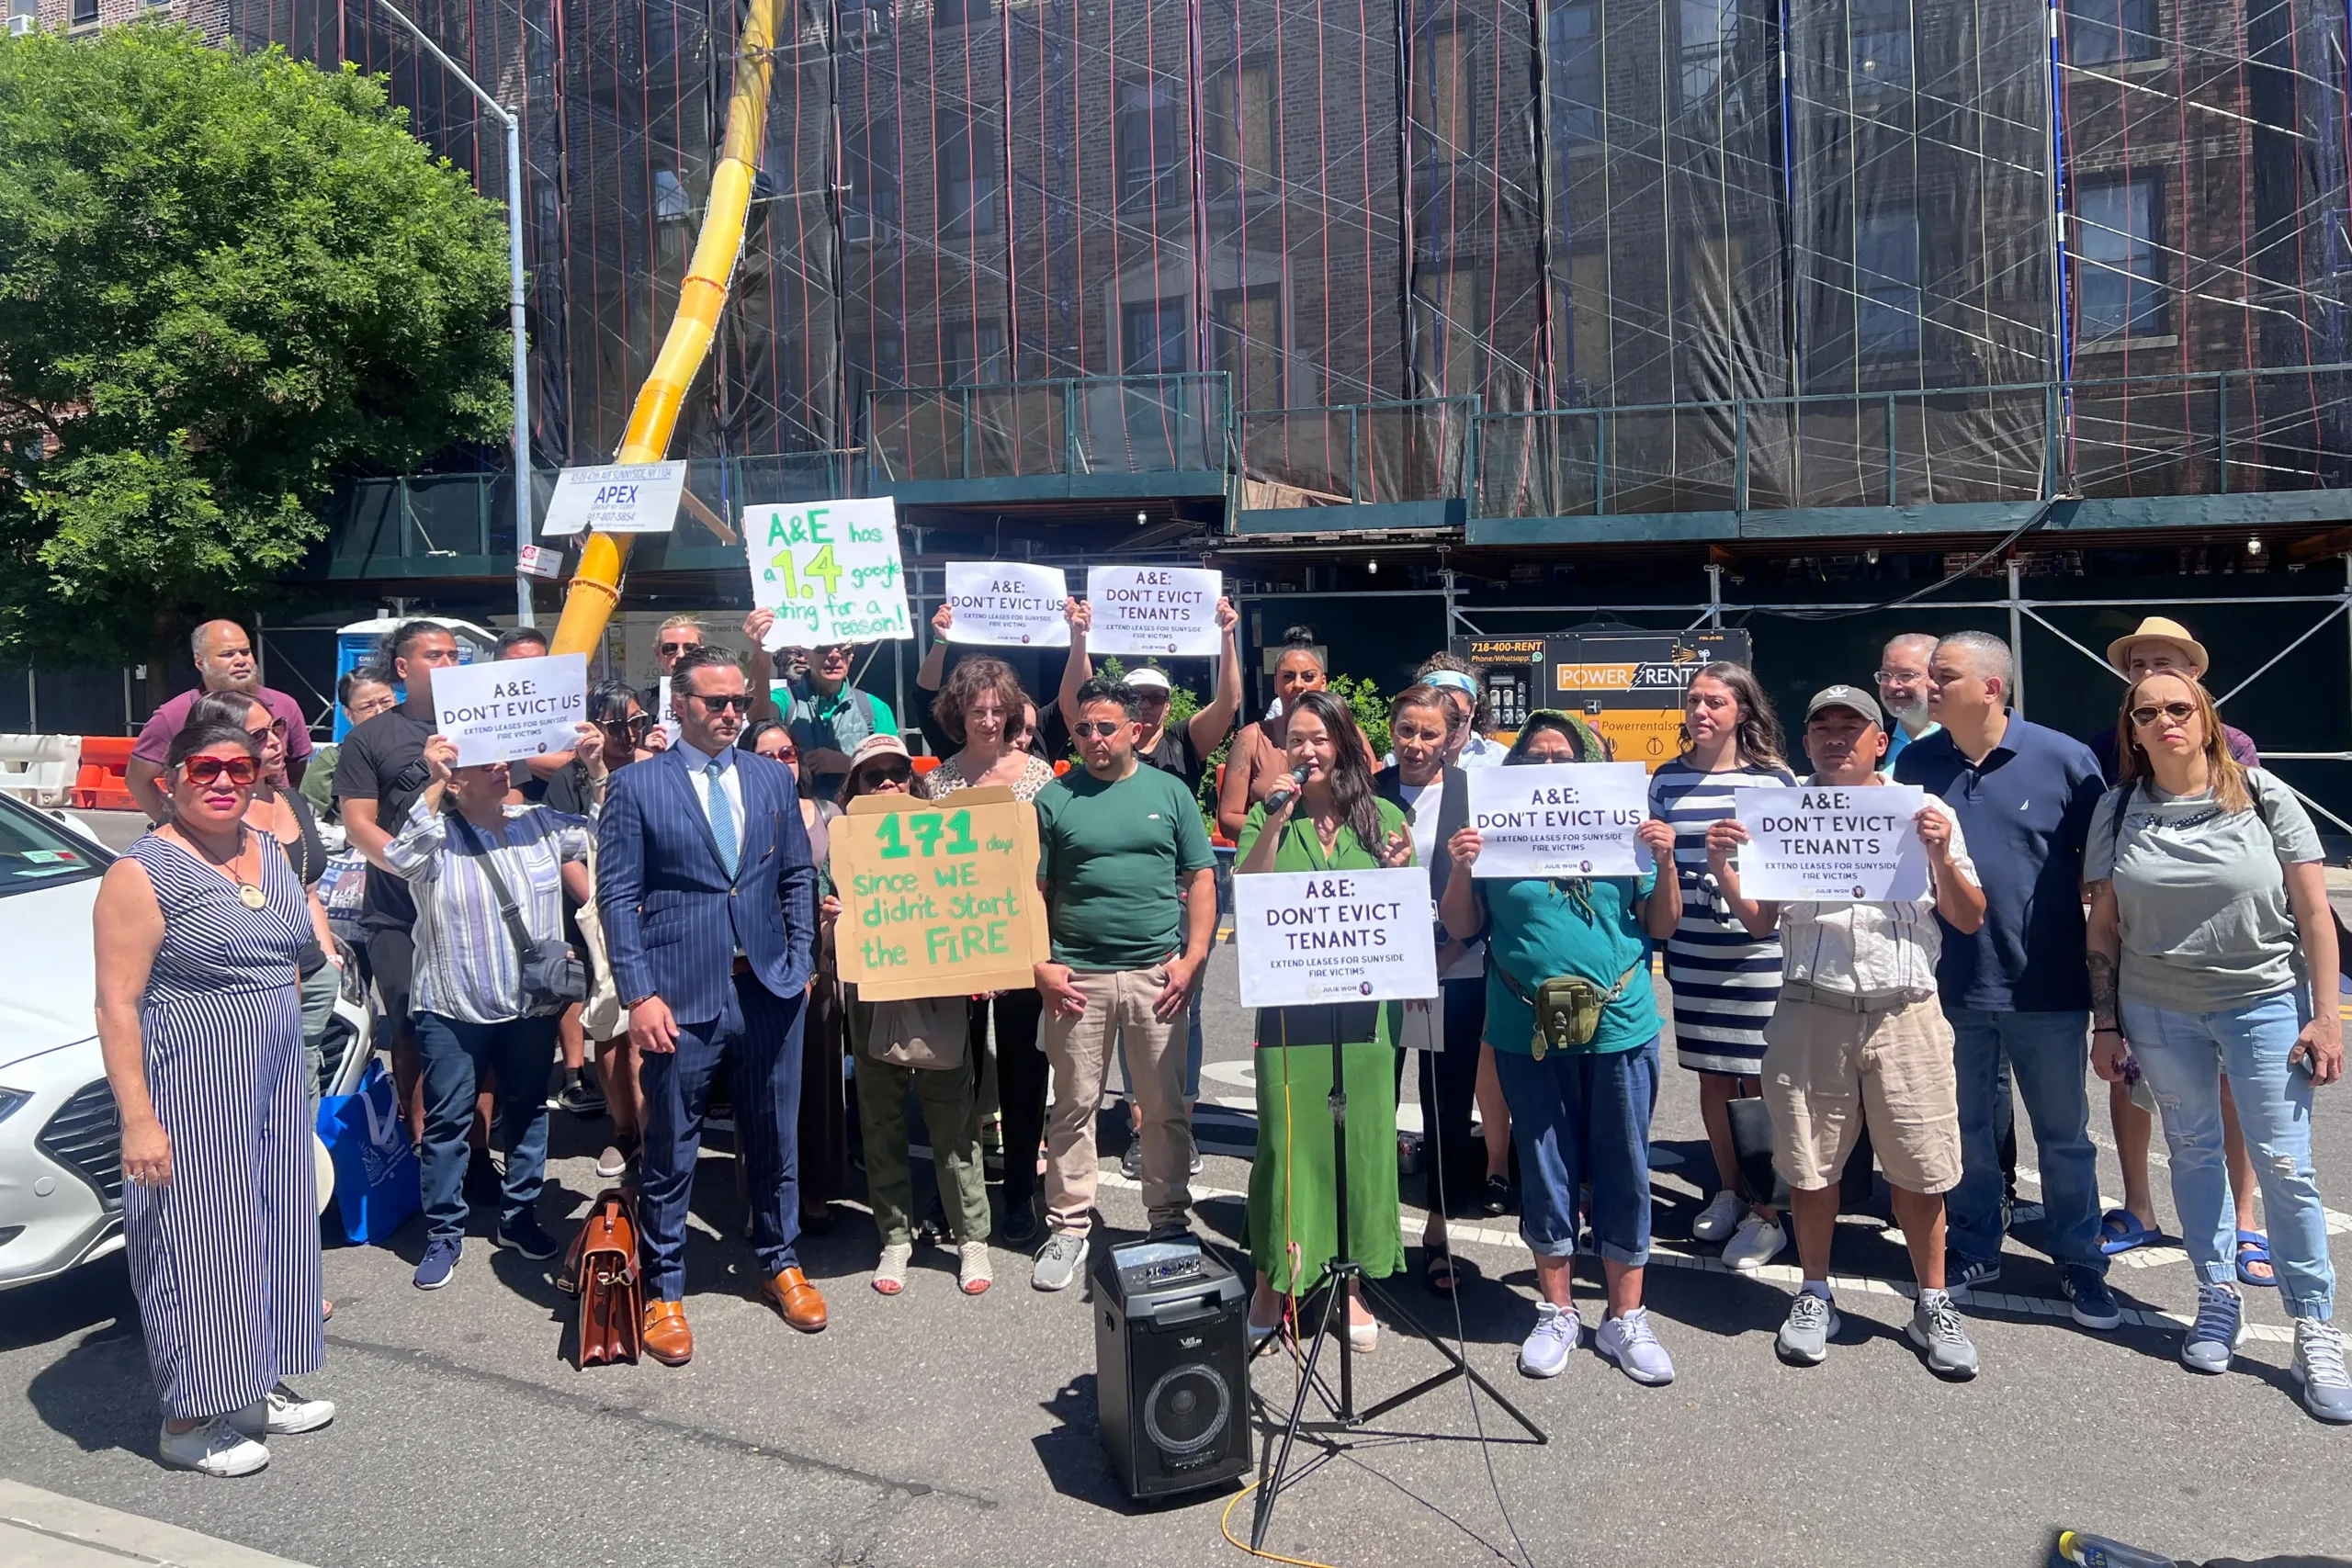 Sunnyside Post: Sunnyside stands with neighbors displaced by 5-alarm inferno last year as they face further evictions by landlord